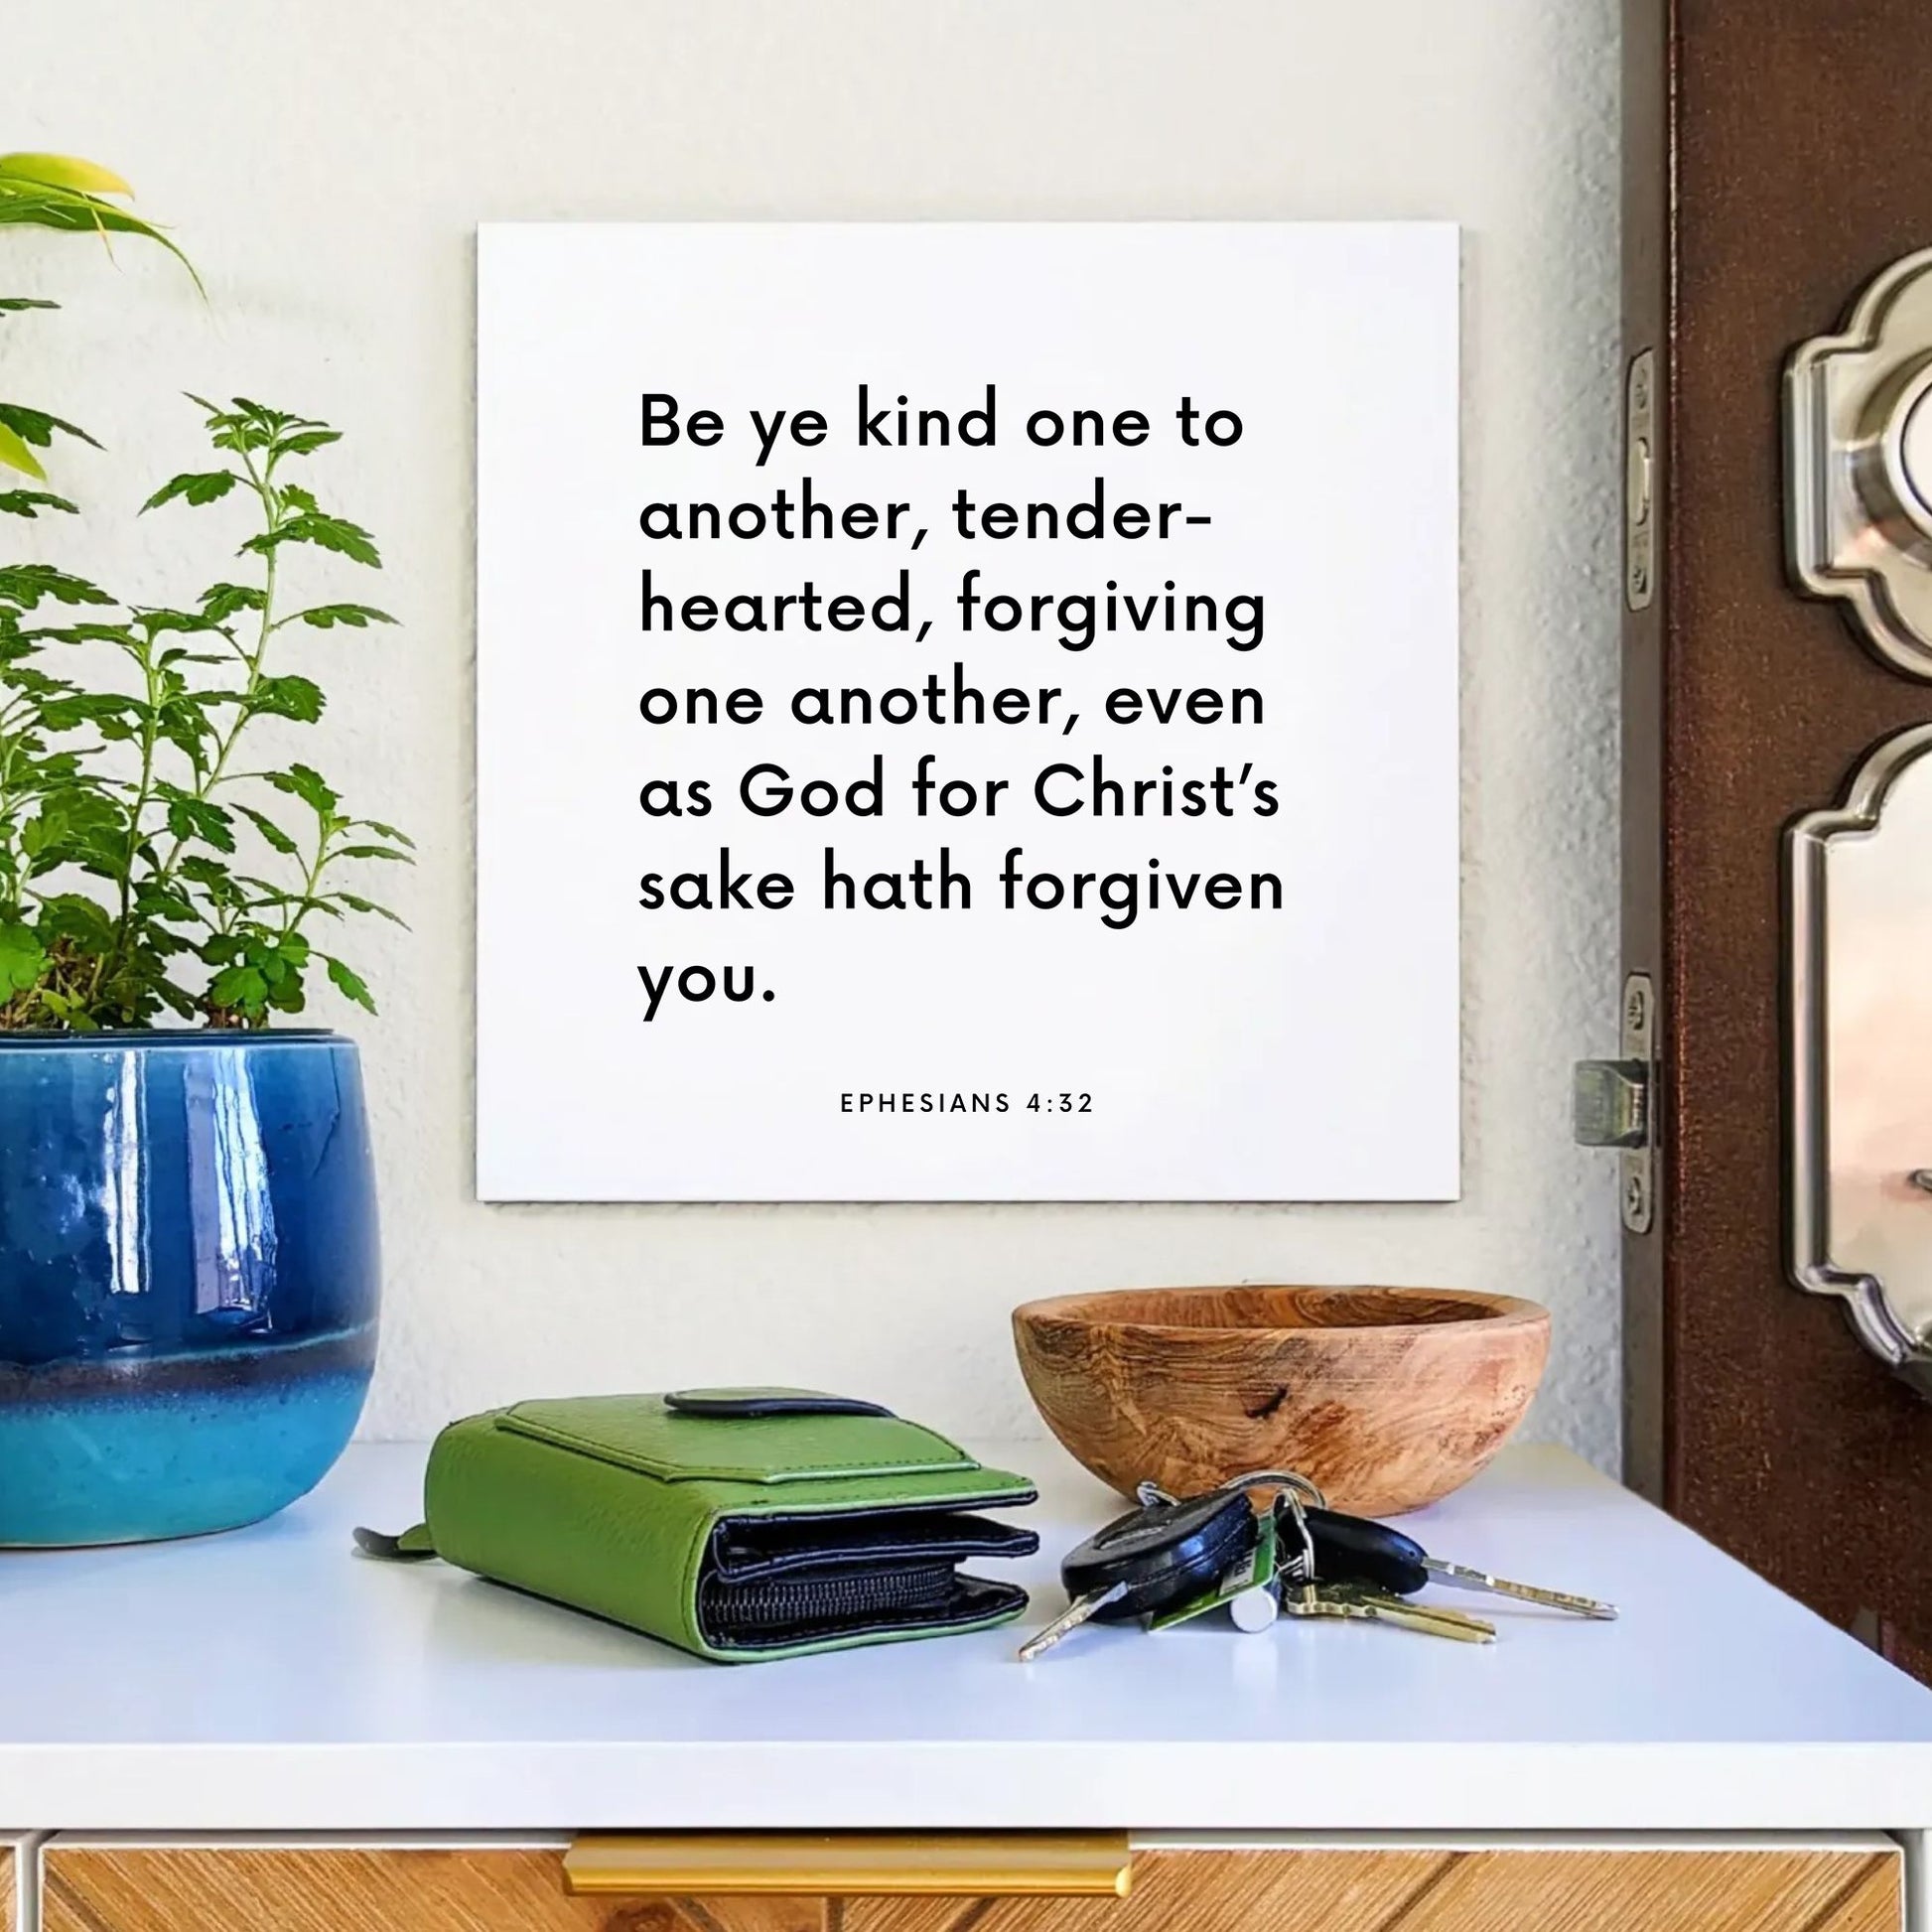 Entryway mouting of the scripture tile for Ephesians 4:32 - "Be ye kind one to another, tenderhearted"